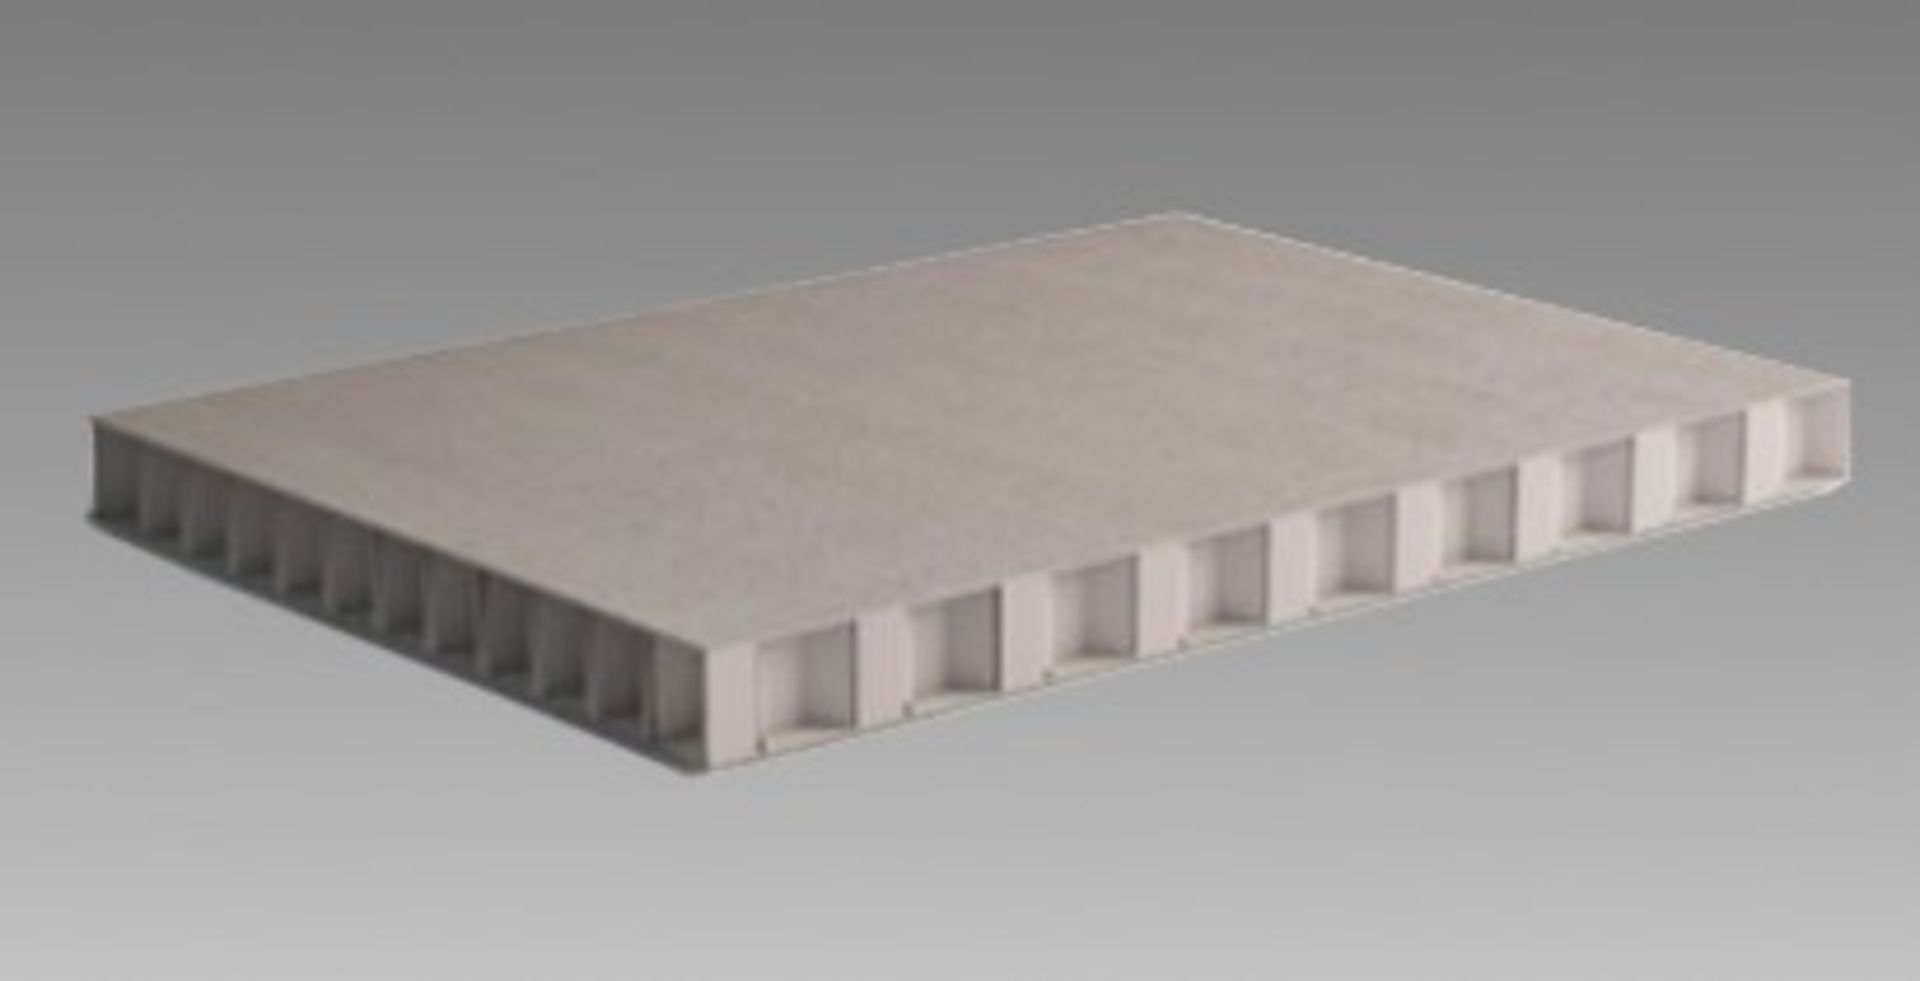 5 x ThermHex Thermoplastic Honeycomb Core Panels - Size 3175 x 1210 x 18mm - New Stock - Lightweight